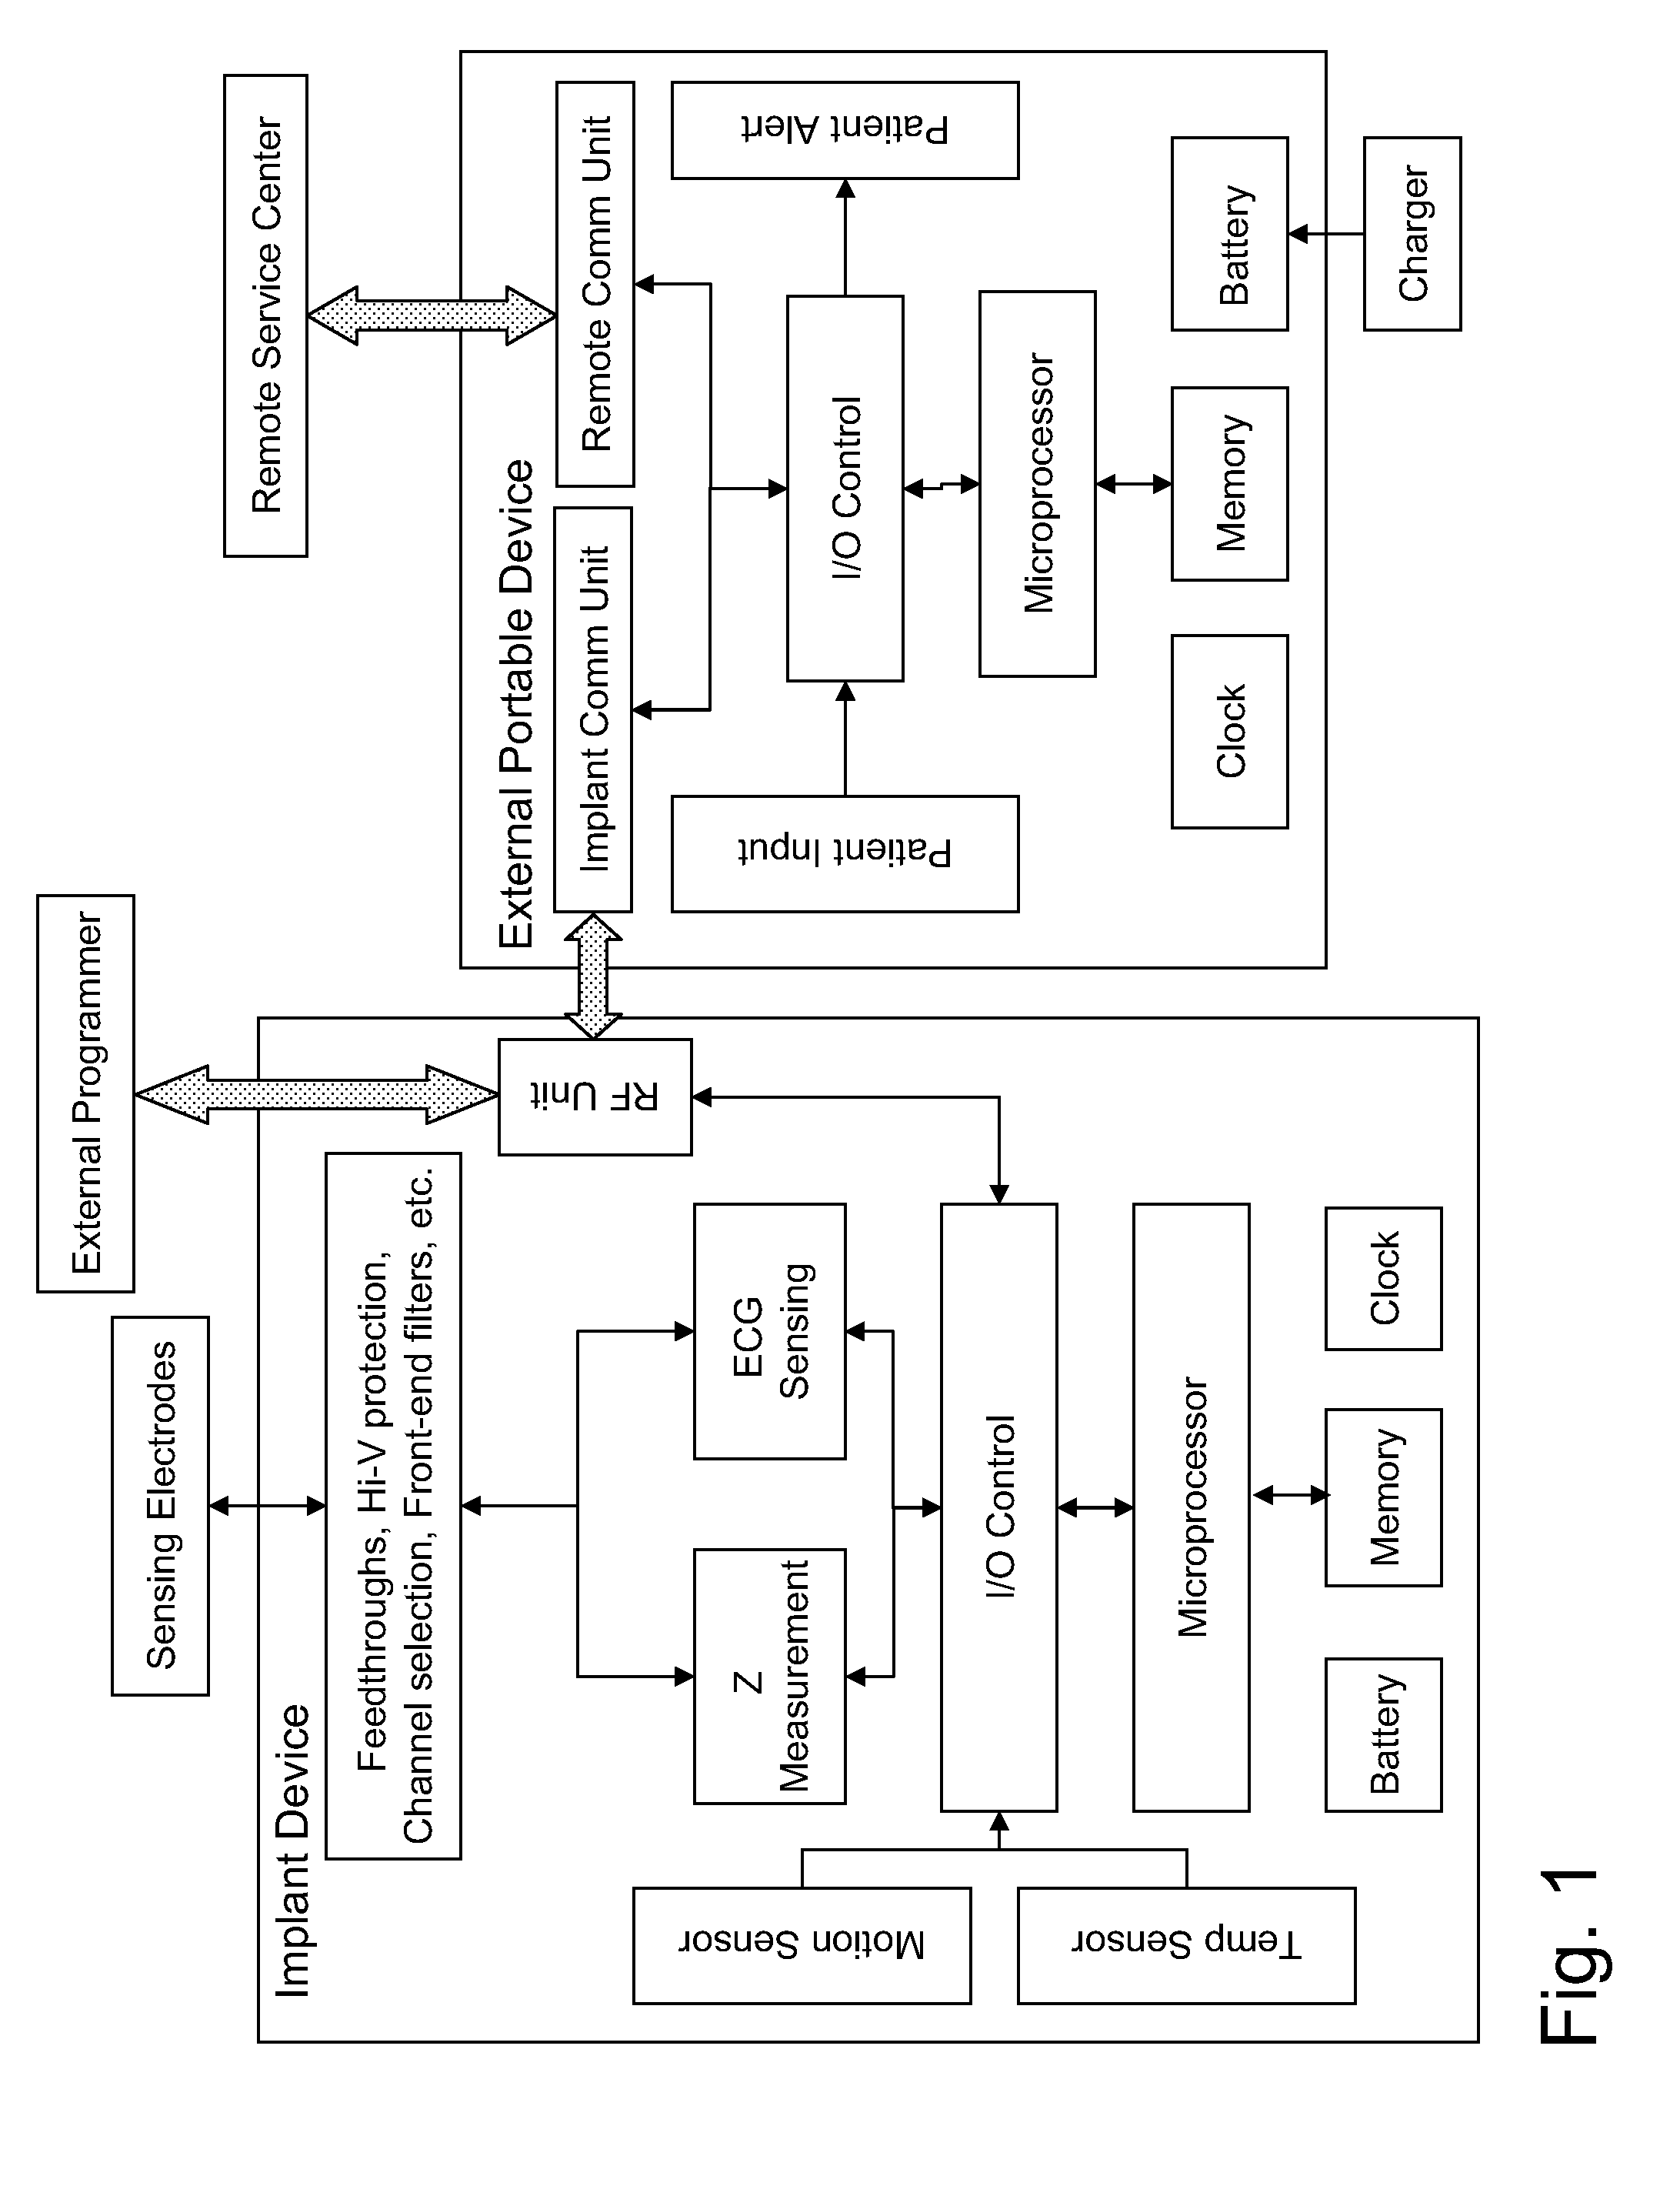 Heart monitoring device and method